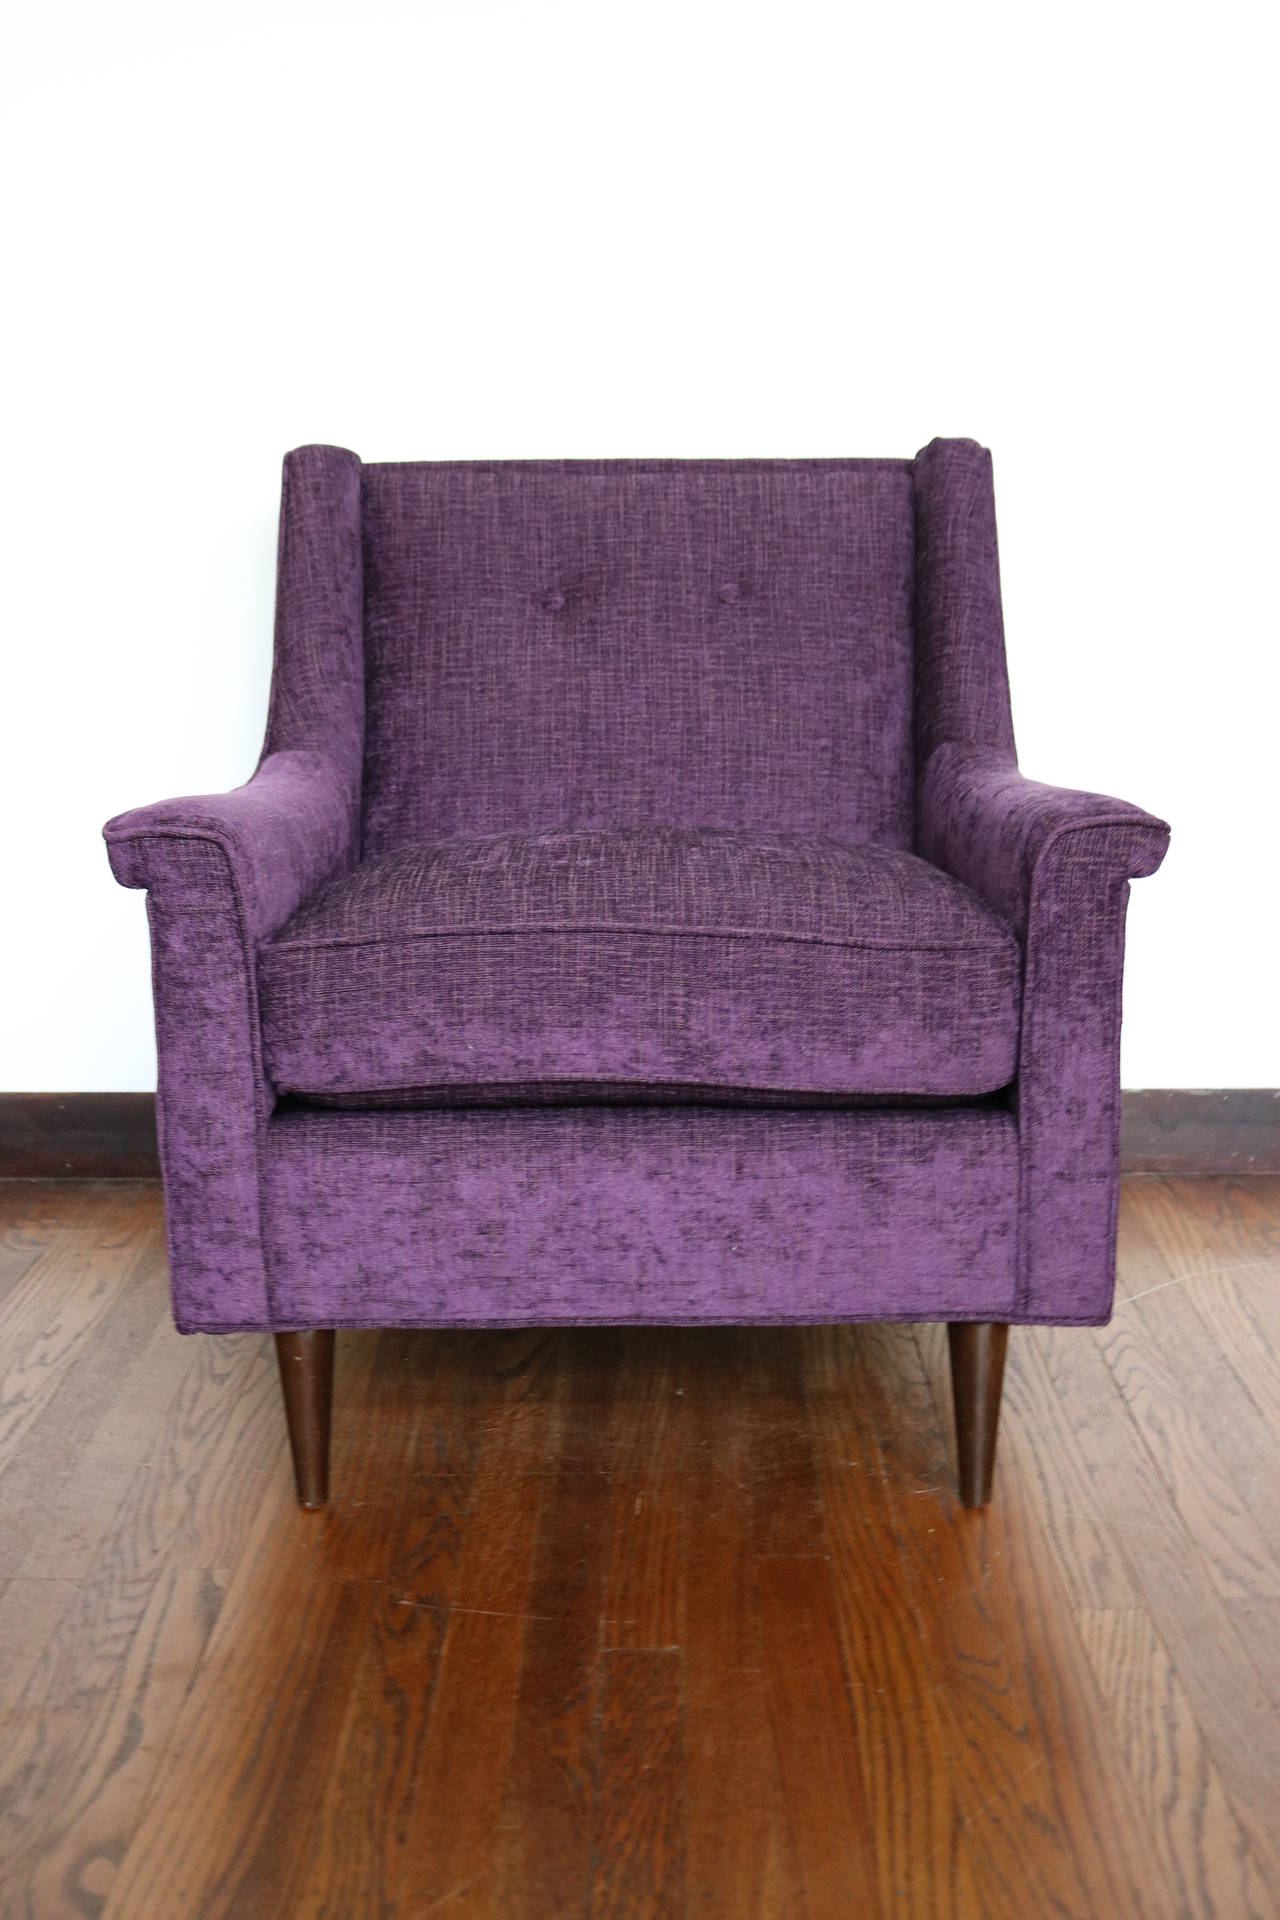 This lovely mid century armchair has been fully restored.  Lovely aubergine chenille with rust threads set off the walnut lets.  Comfortable and stylish!